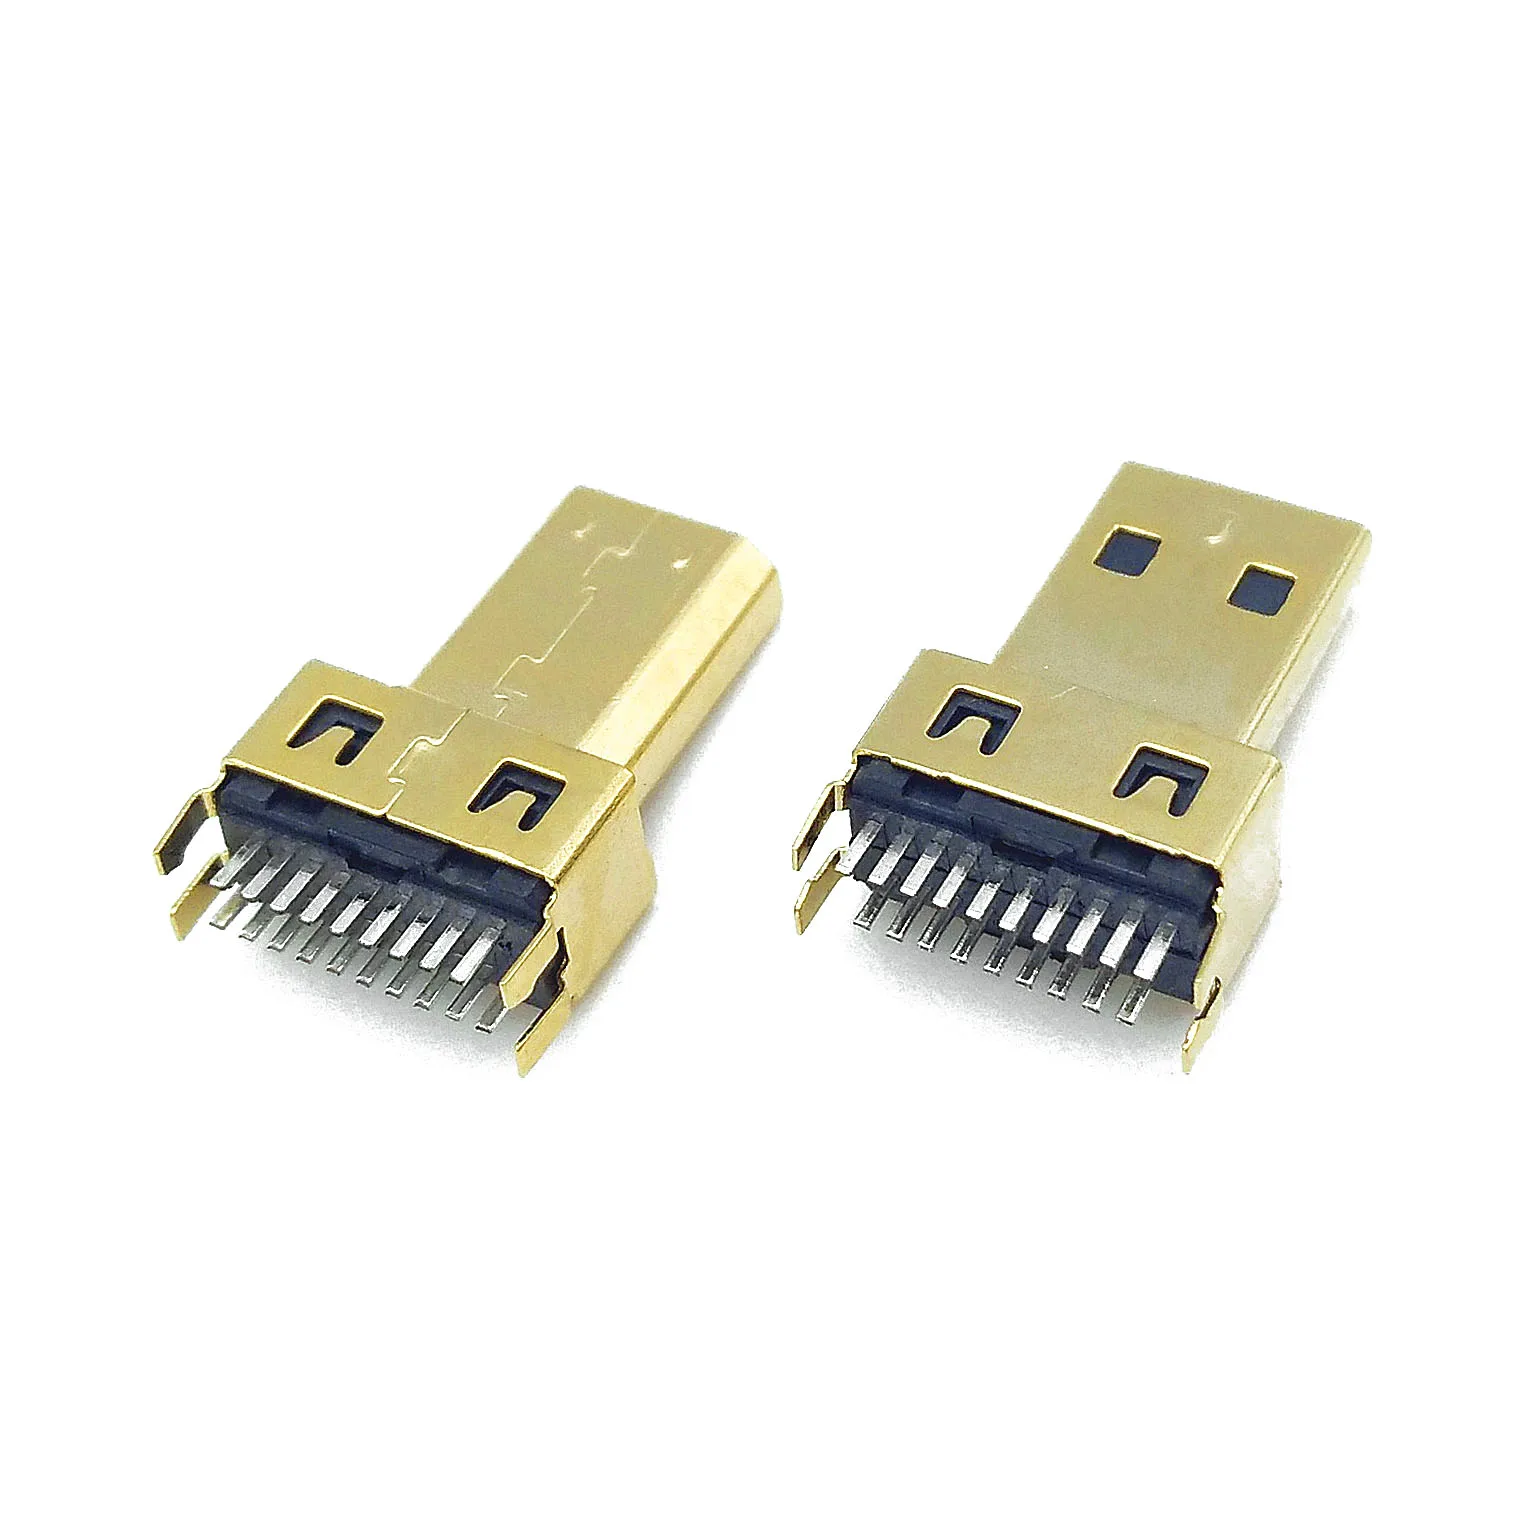 20PCS Micro HDMI Male Jack Plug Connector D-Type 19PIN 19P Splint Gold-Plated